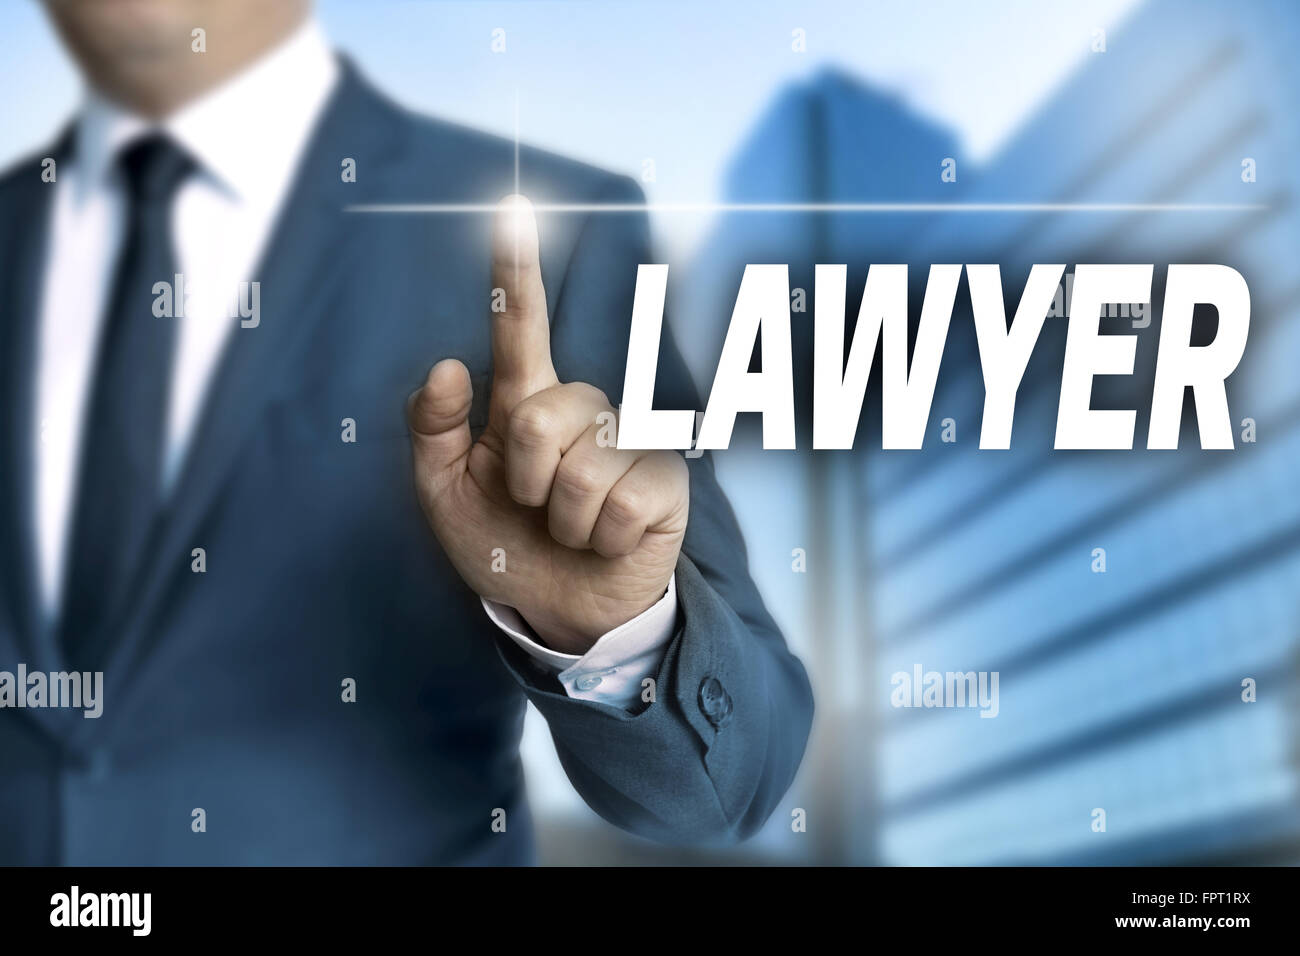 lawyer touchscreen is operated by businessman. Stock Photo